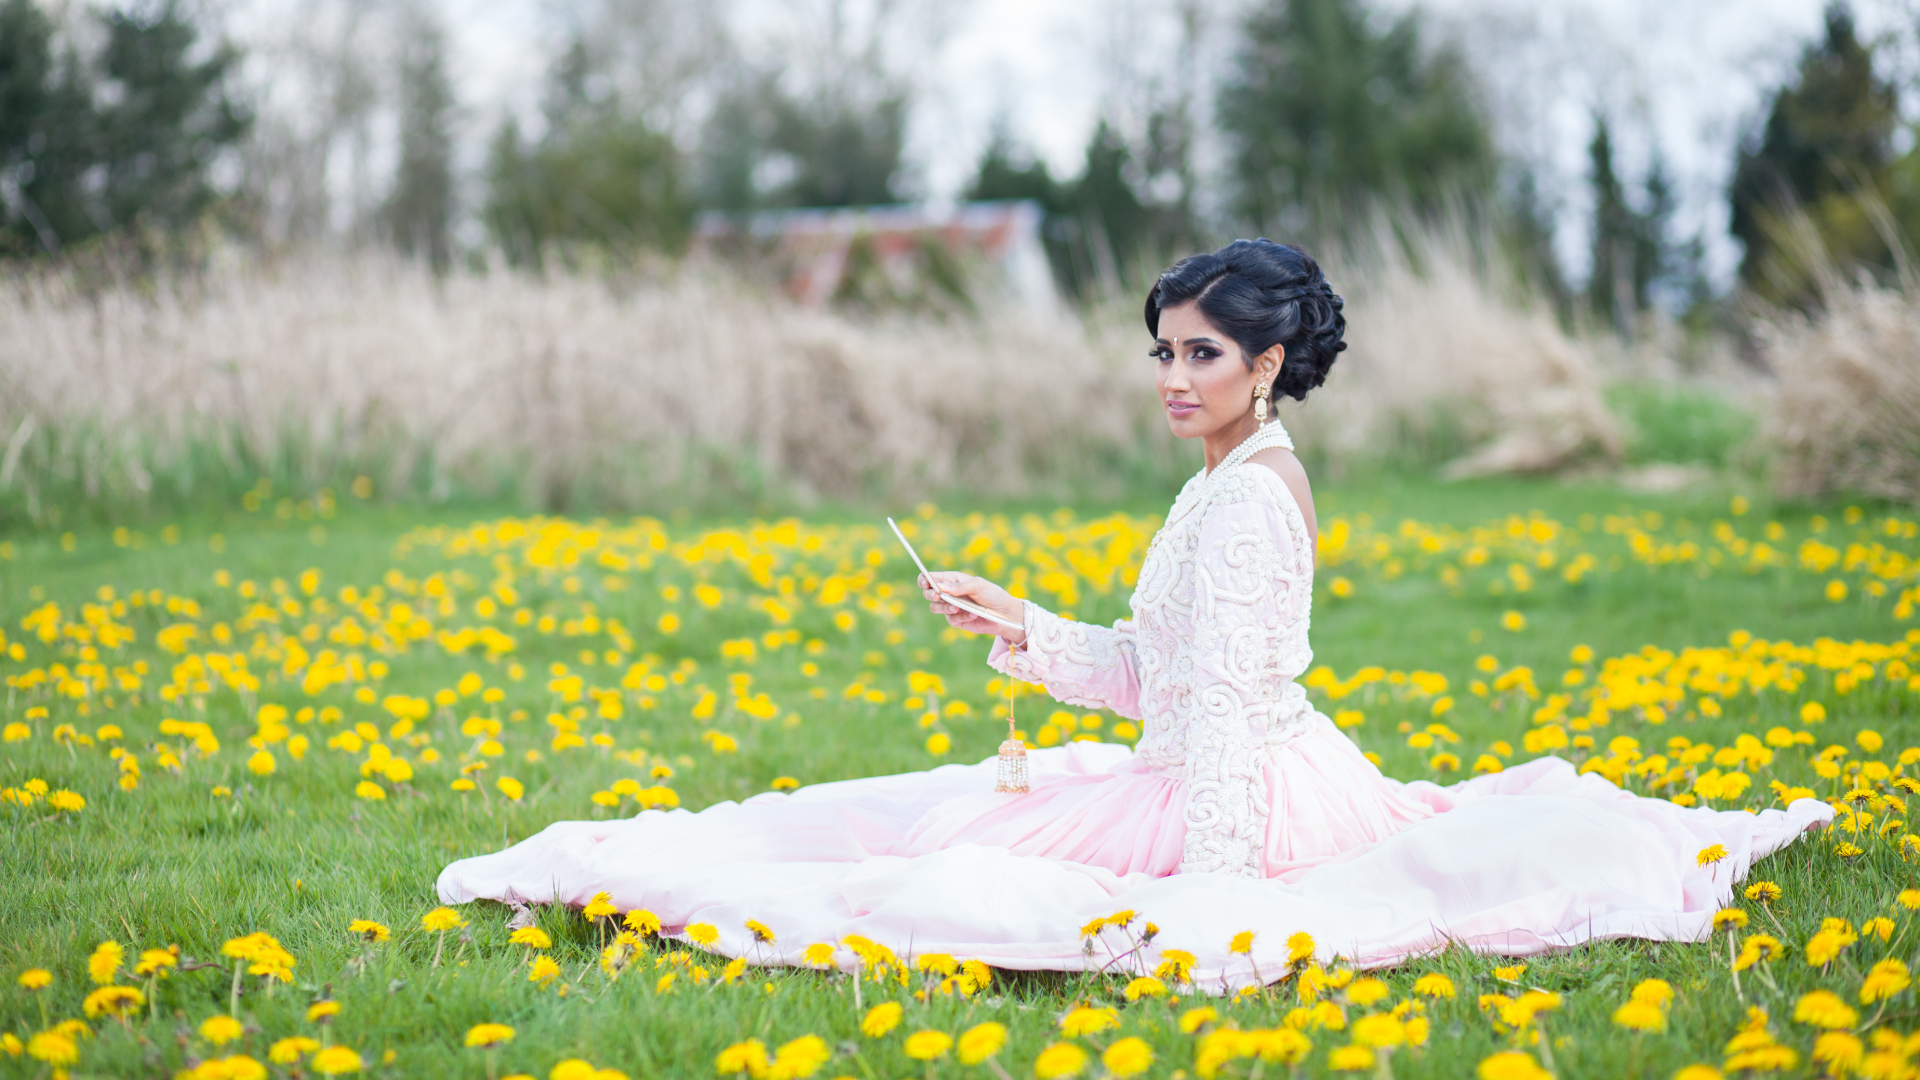 Actor Rami Kahlon in a white dress sitting in a field